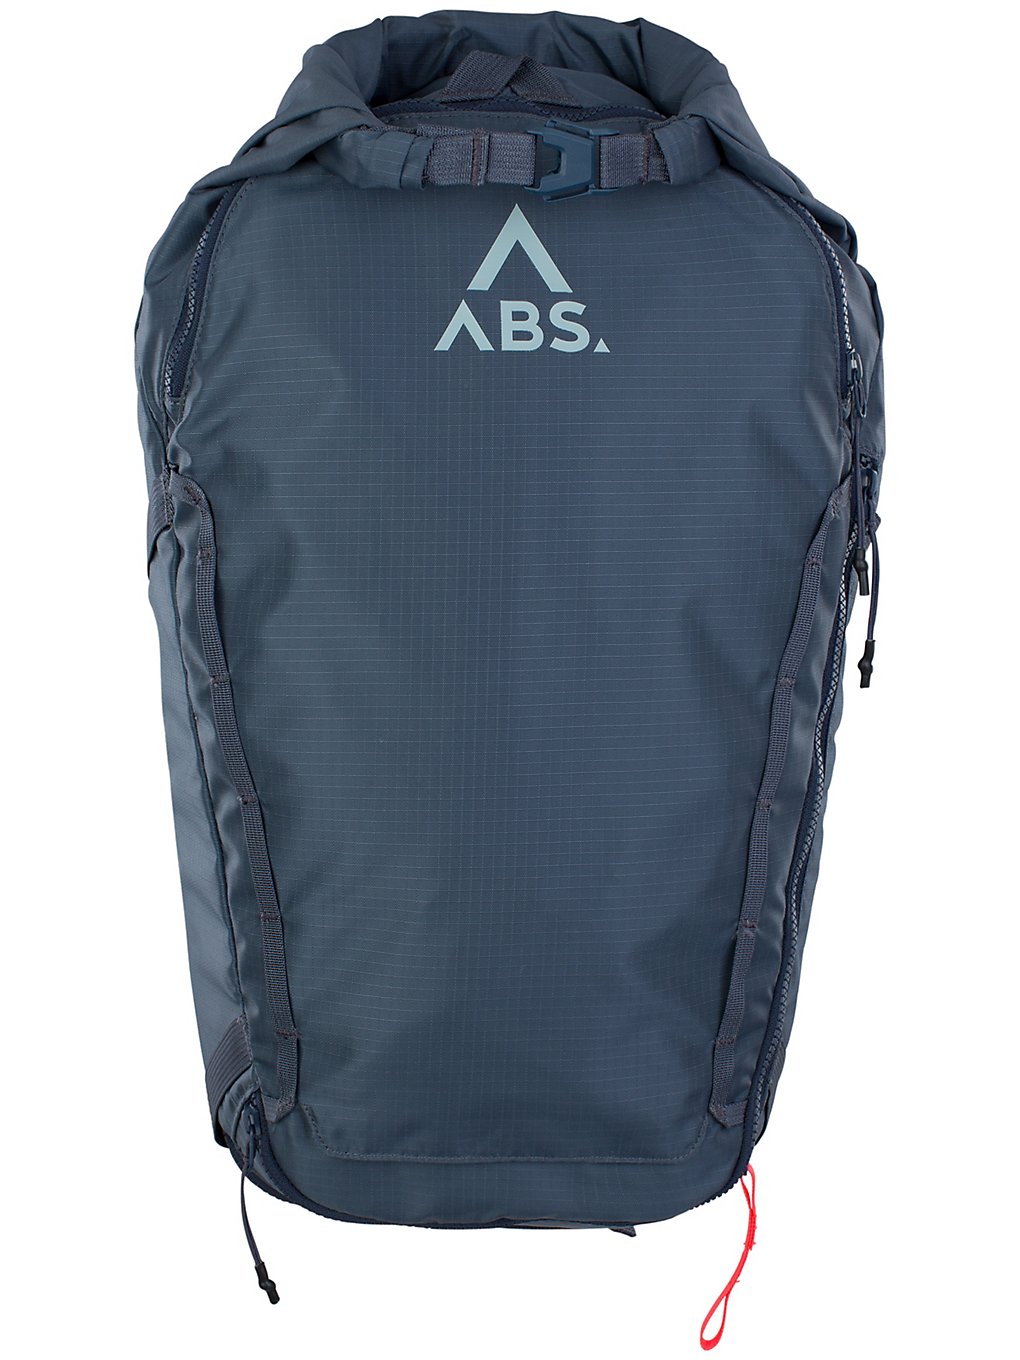 ABS A.Light Tour Extension Pack 35-40L Backpack dusk